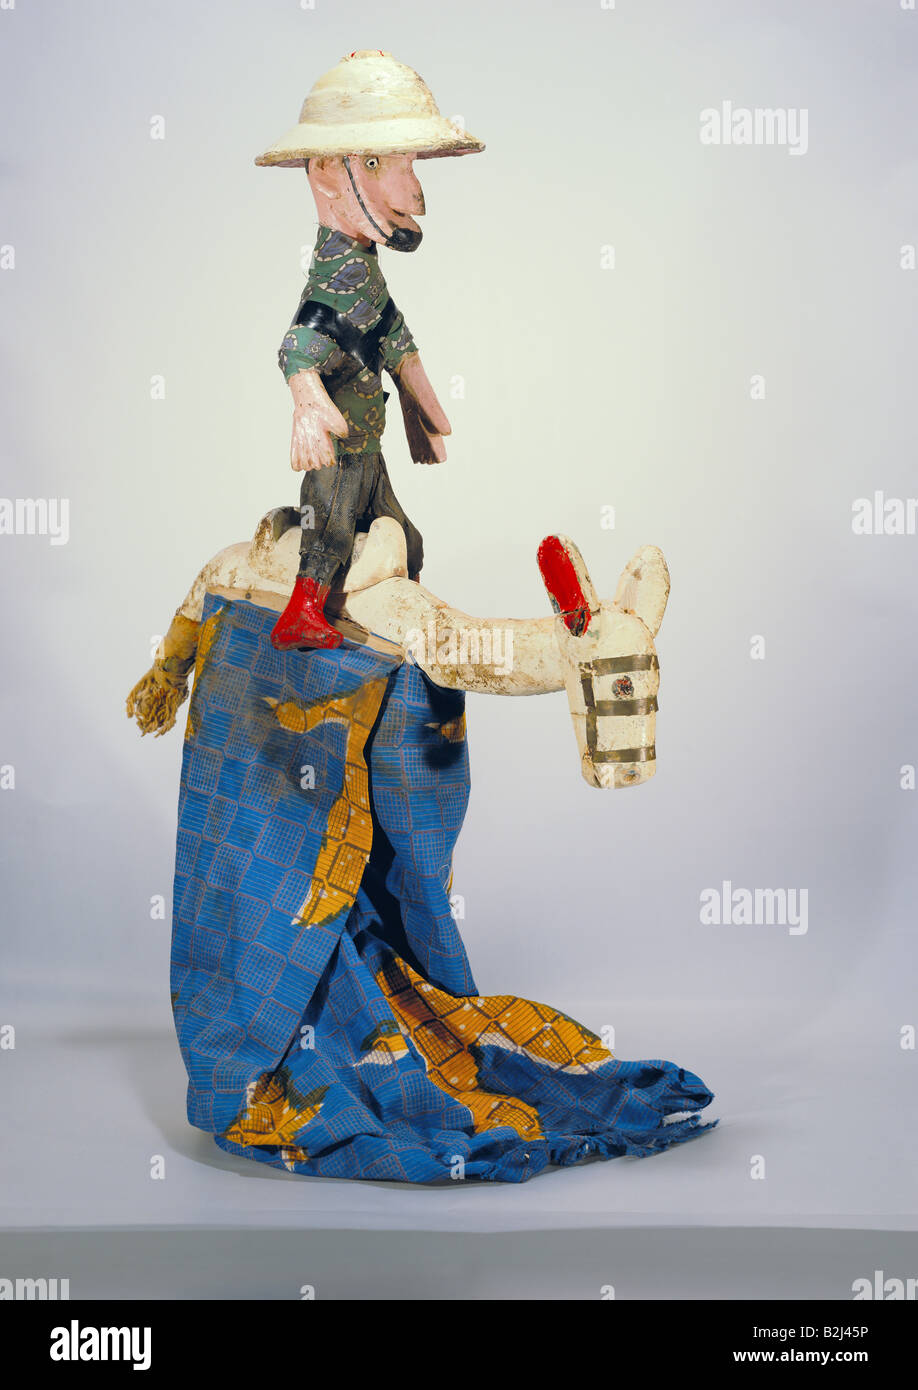 theatre, puppet theatre, rod puppet, French colonial soldier, wood and textile, Bambara, Mali, 20th century, Stadtmuseum, Munich, puppets, Africa, fine arts, handcraft, colonialism, France, European, people, historic, historical, Stock Photo